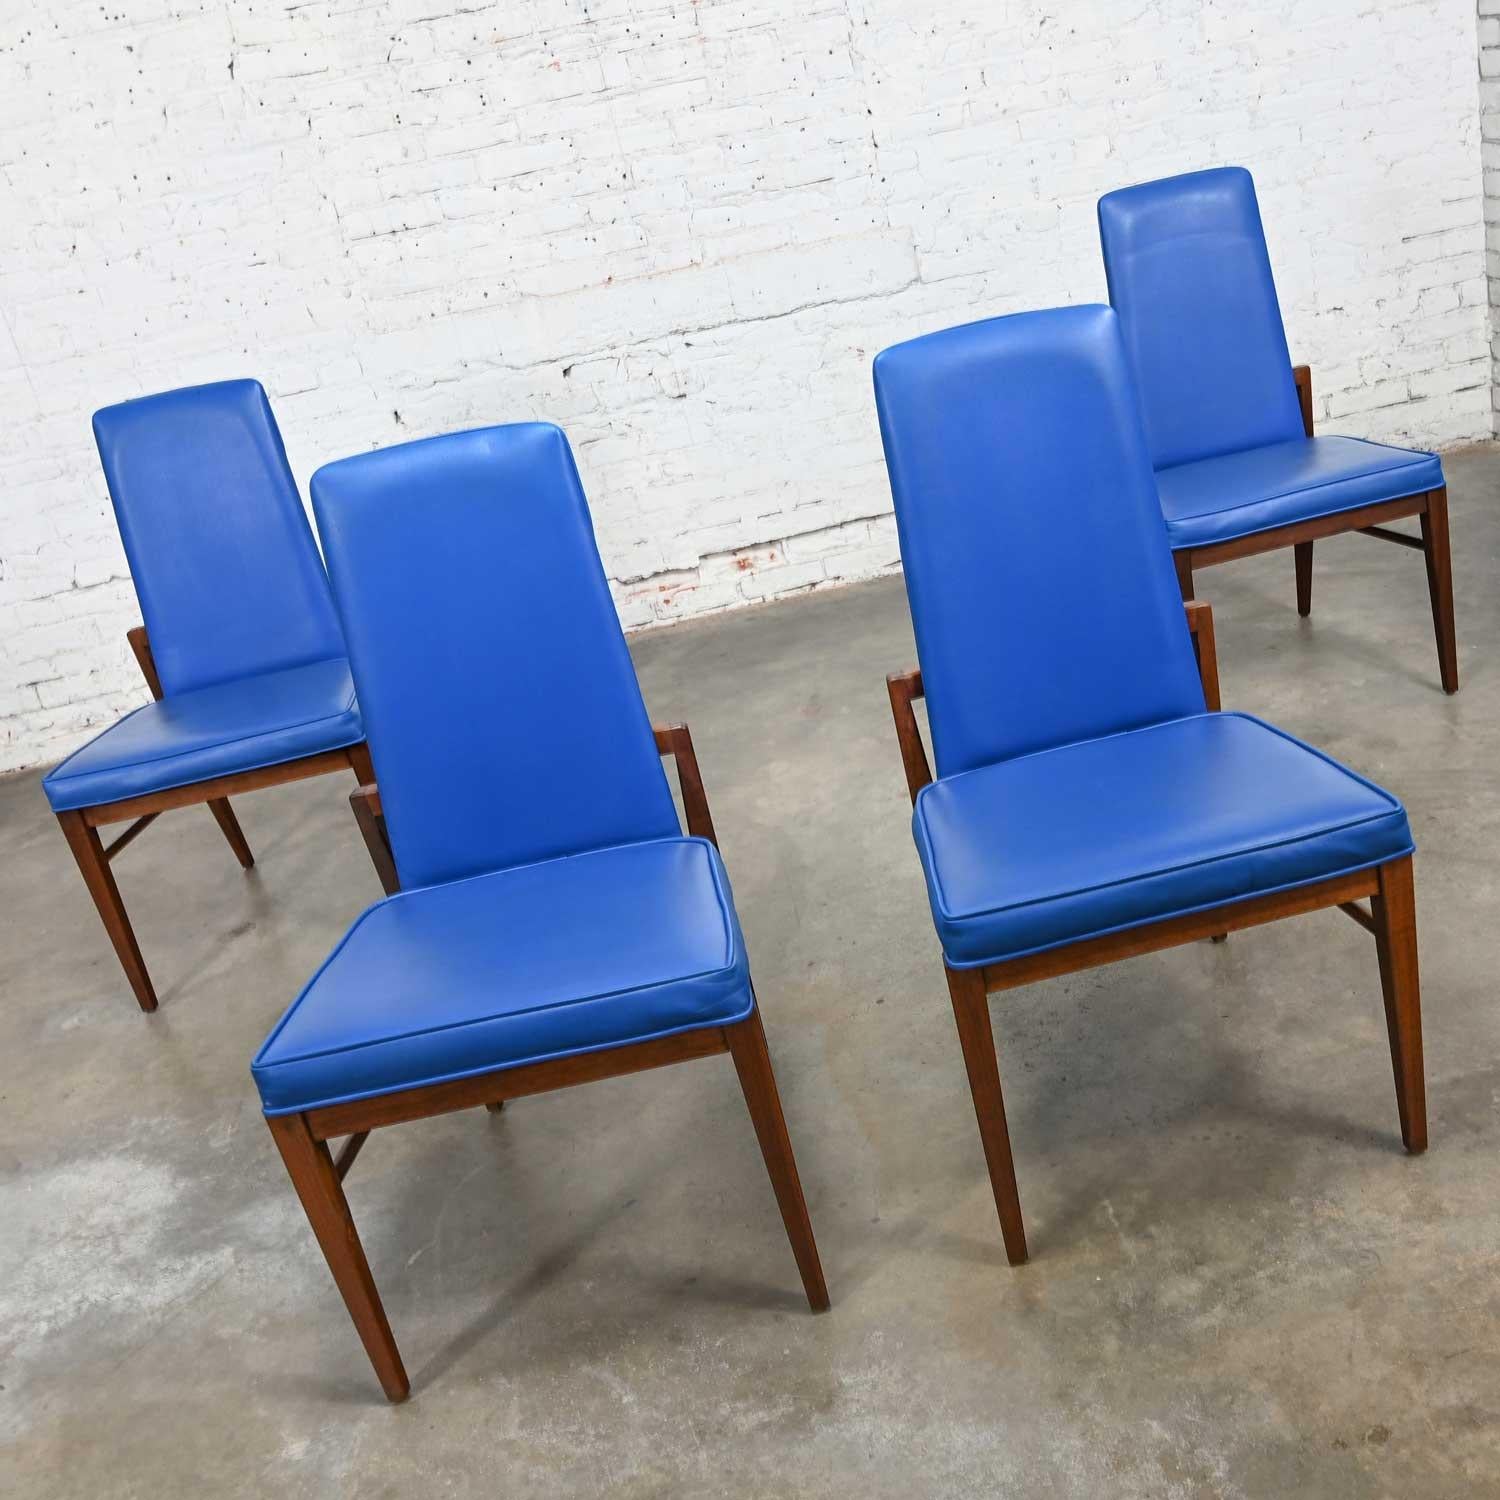 blue dining chairs set of 4